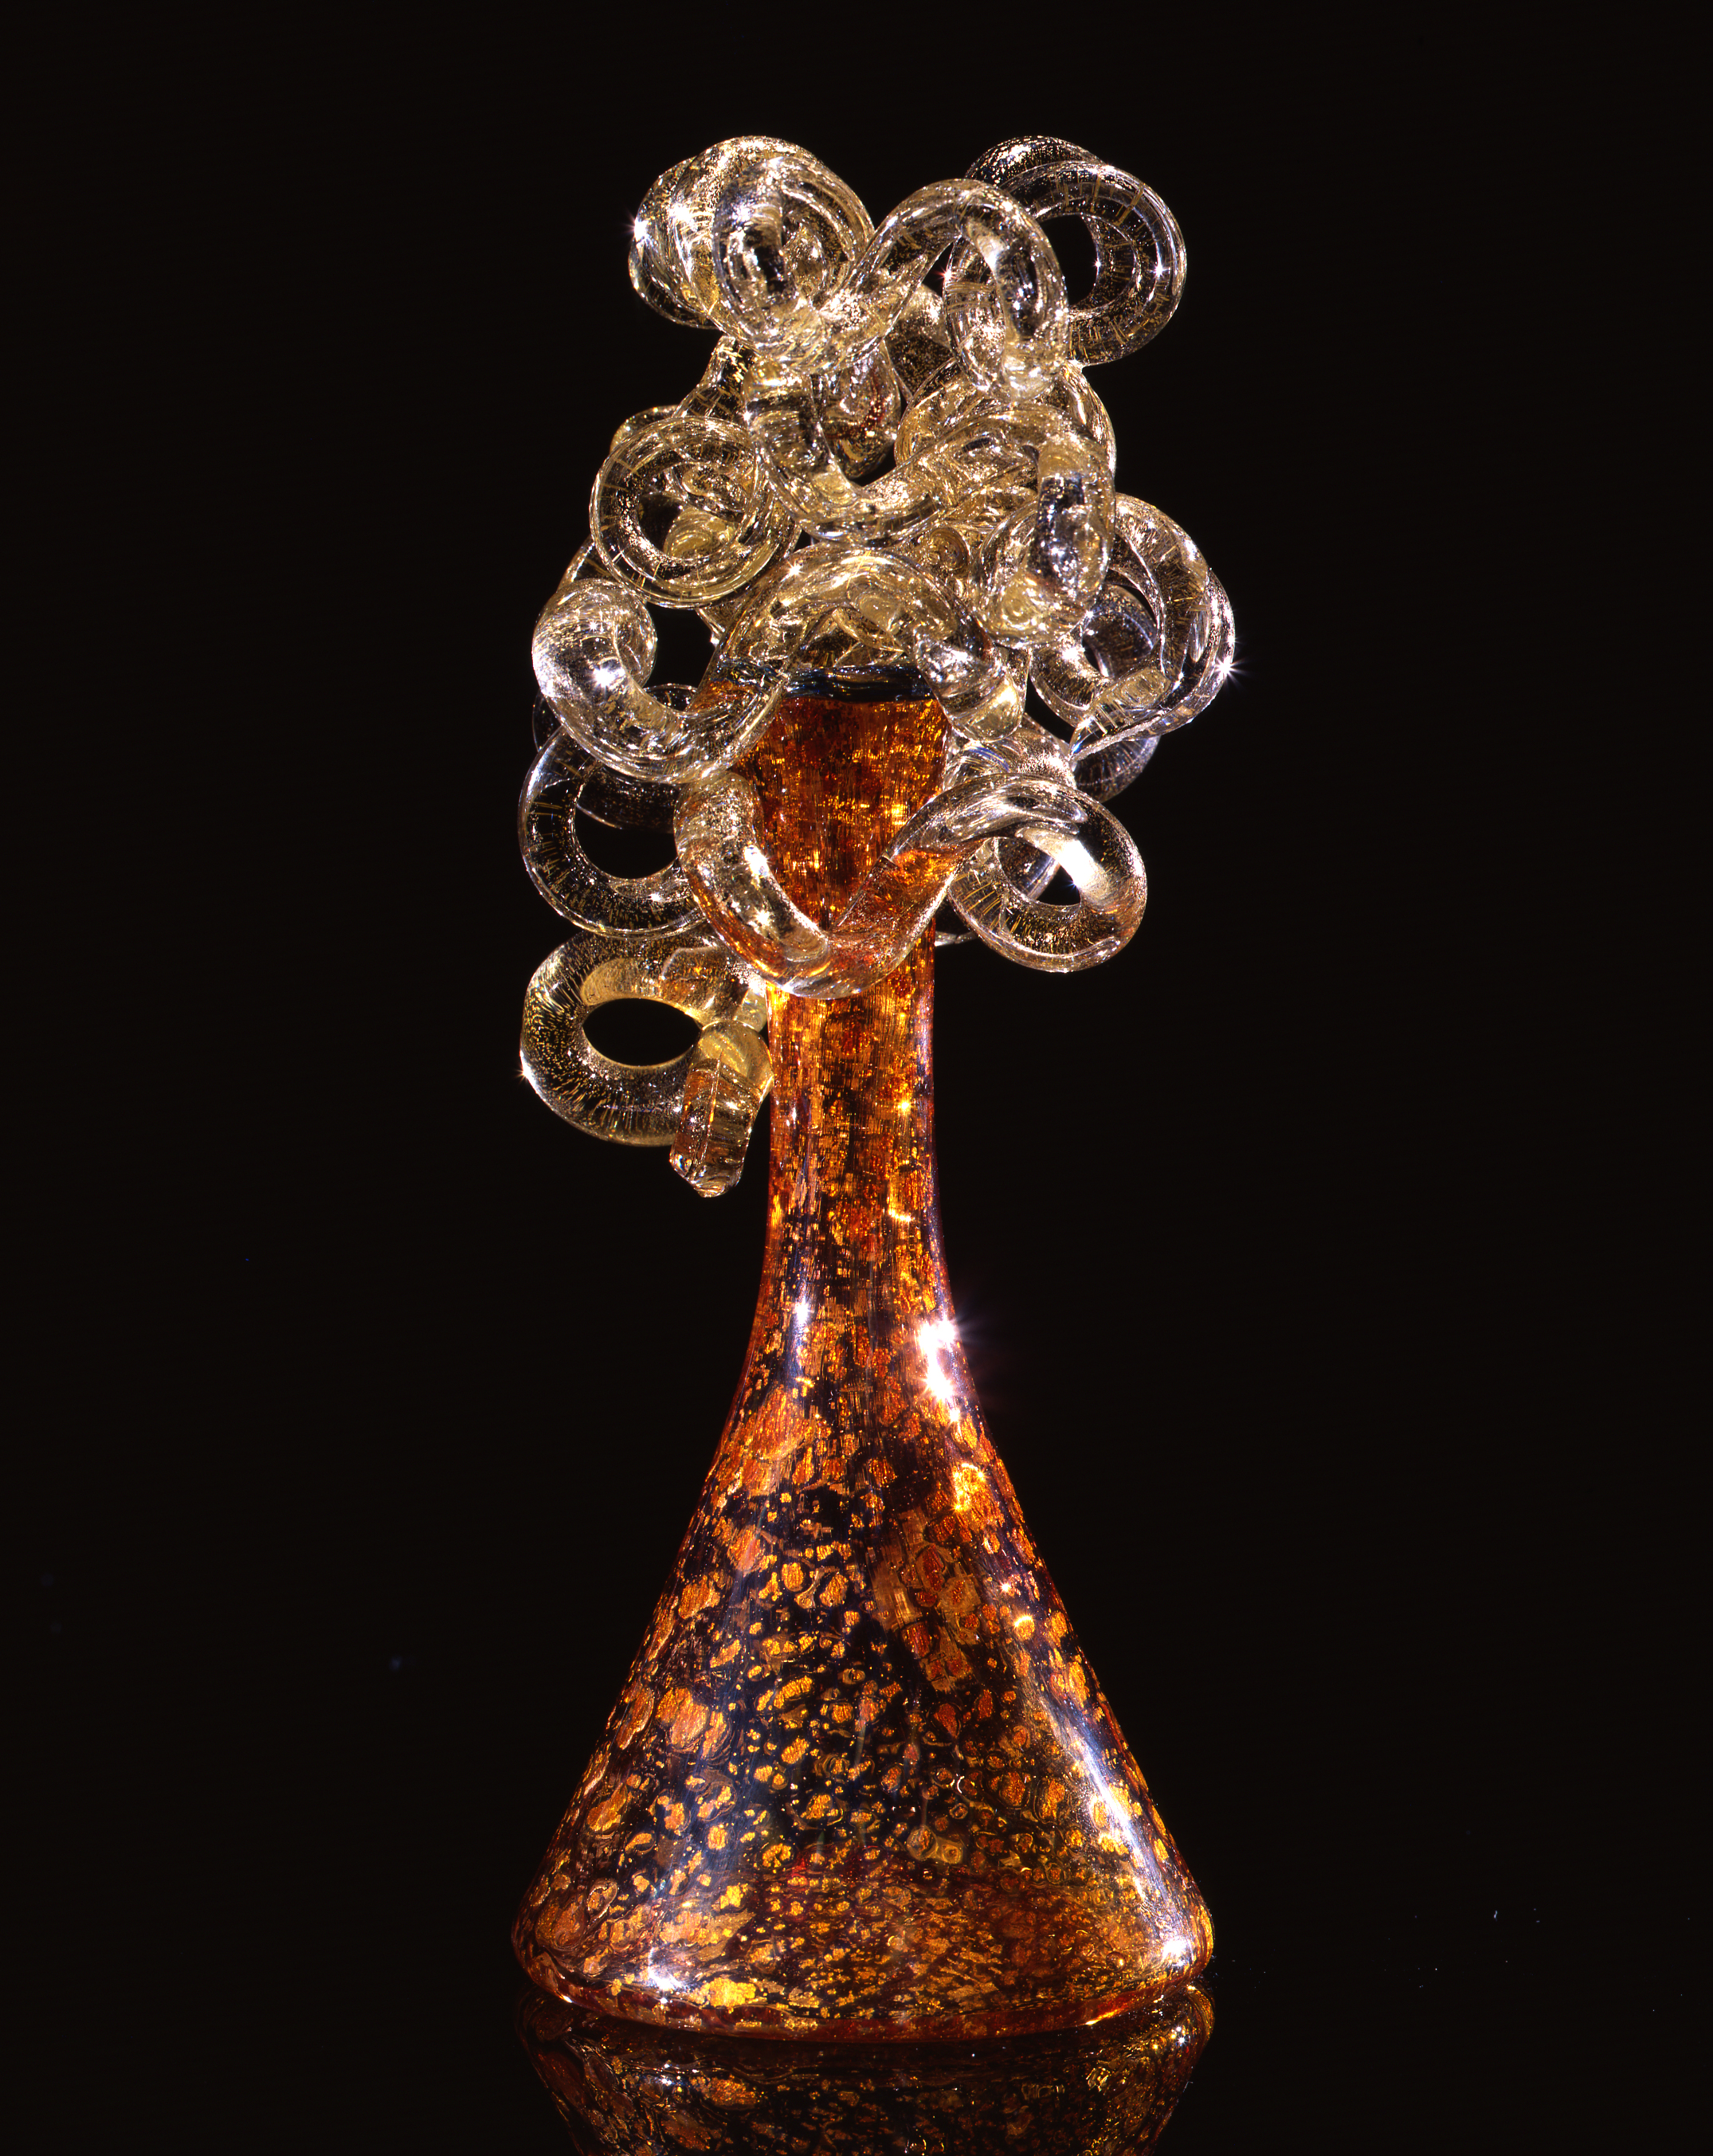  Dale Chihuly,&nbsp; Copper Sienna Piccolo Venetian with Translucent Coils &nbsp;(1990, glass, 17 x 17 x 18 inches) 